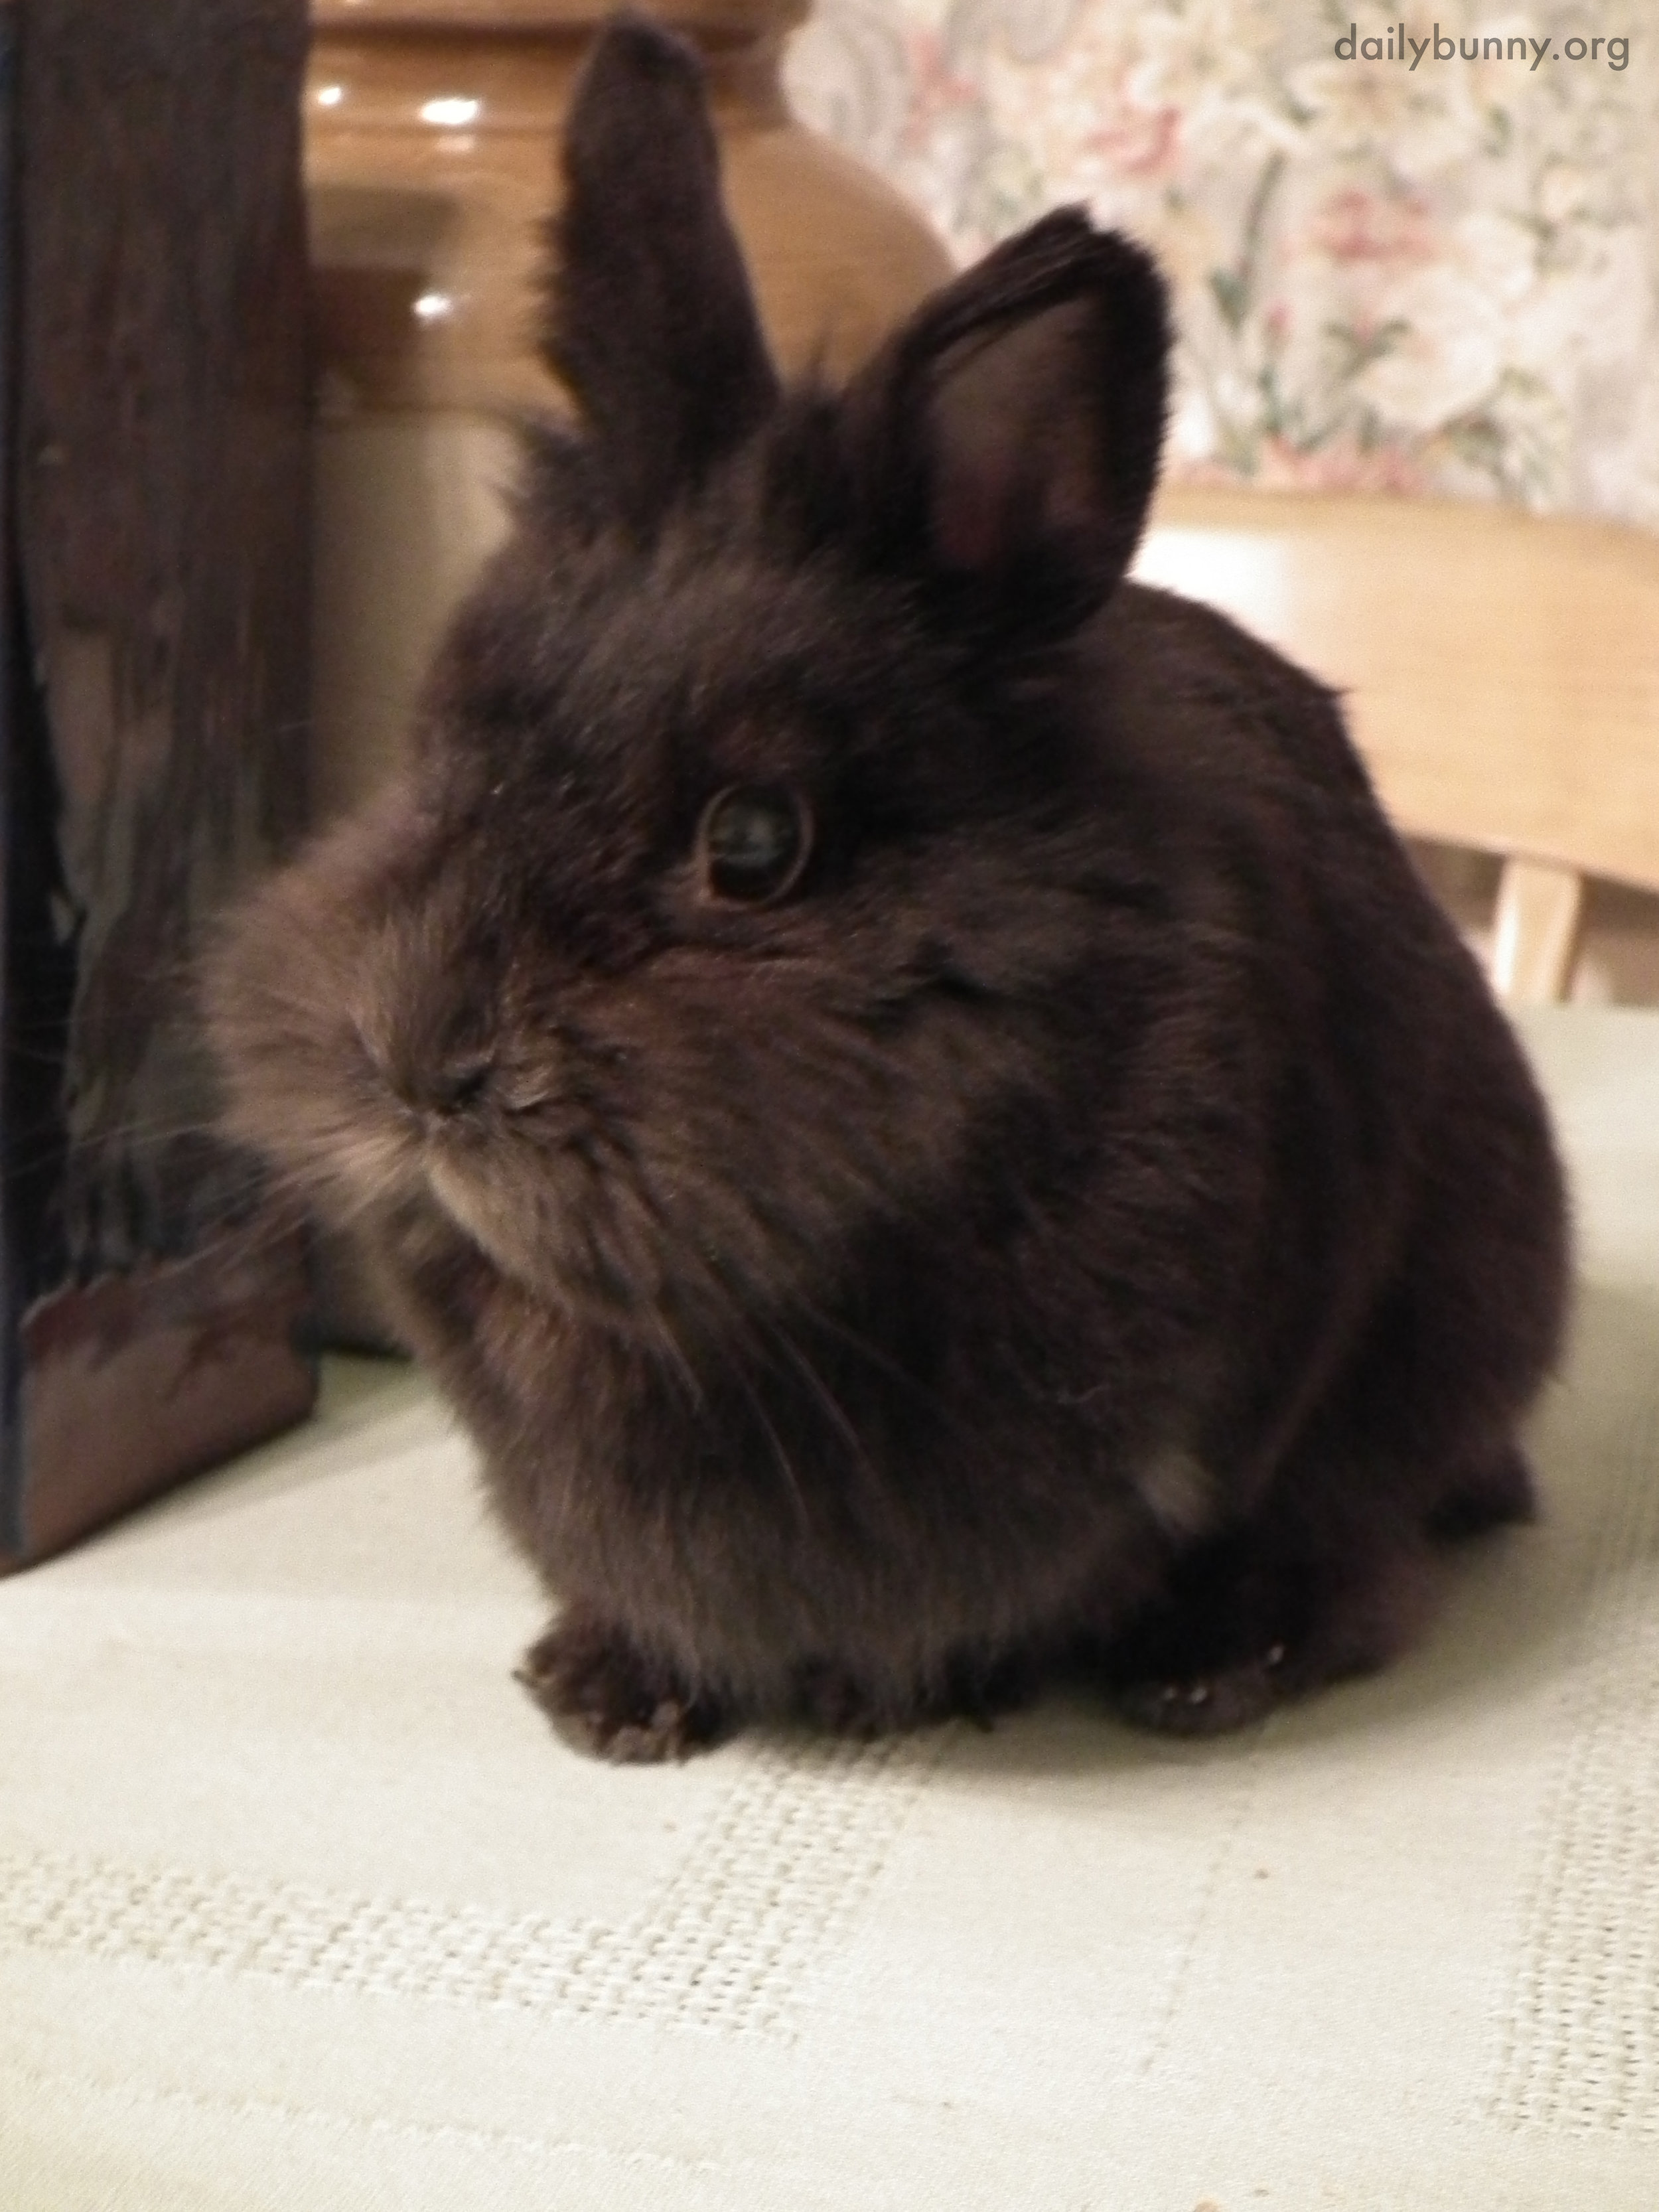 Those Are Some Fluffy Cheeks on Bunny